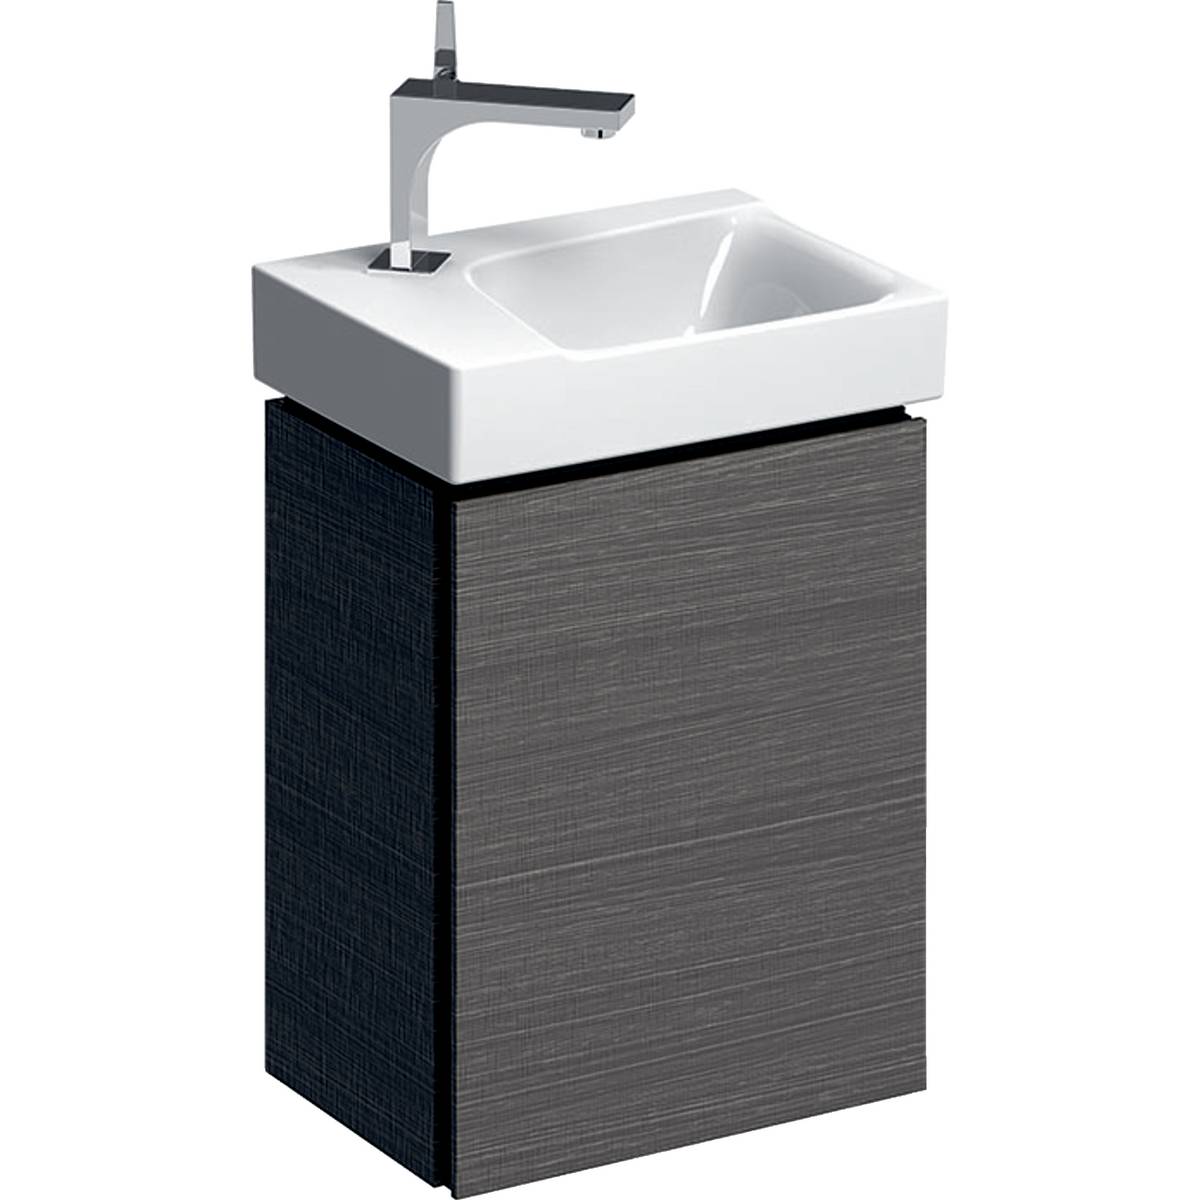 Xeno² cabinet for handrinse basin, with one door